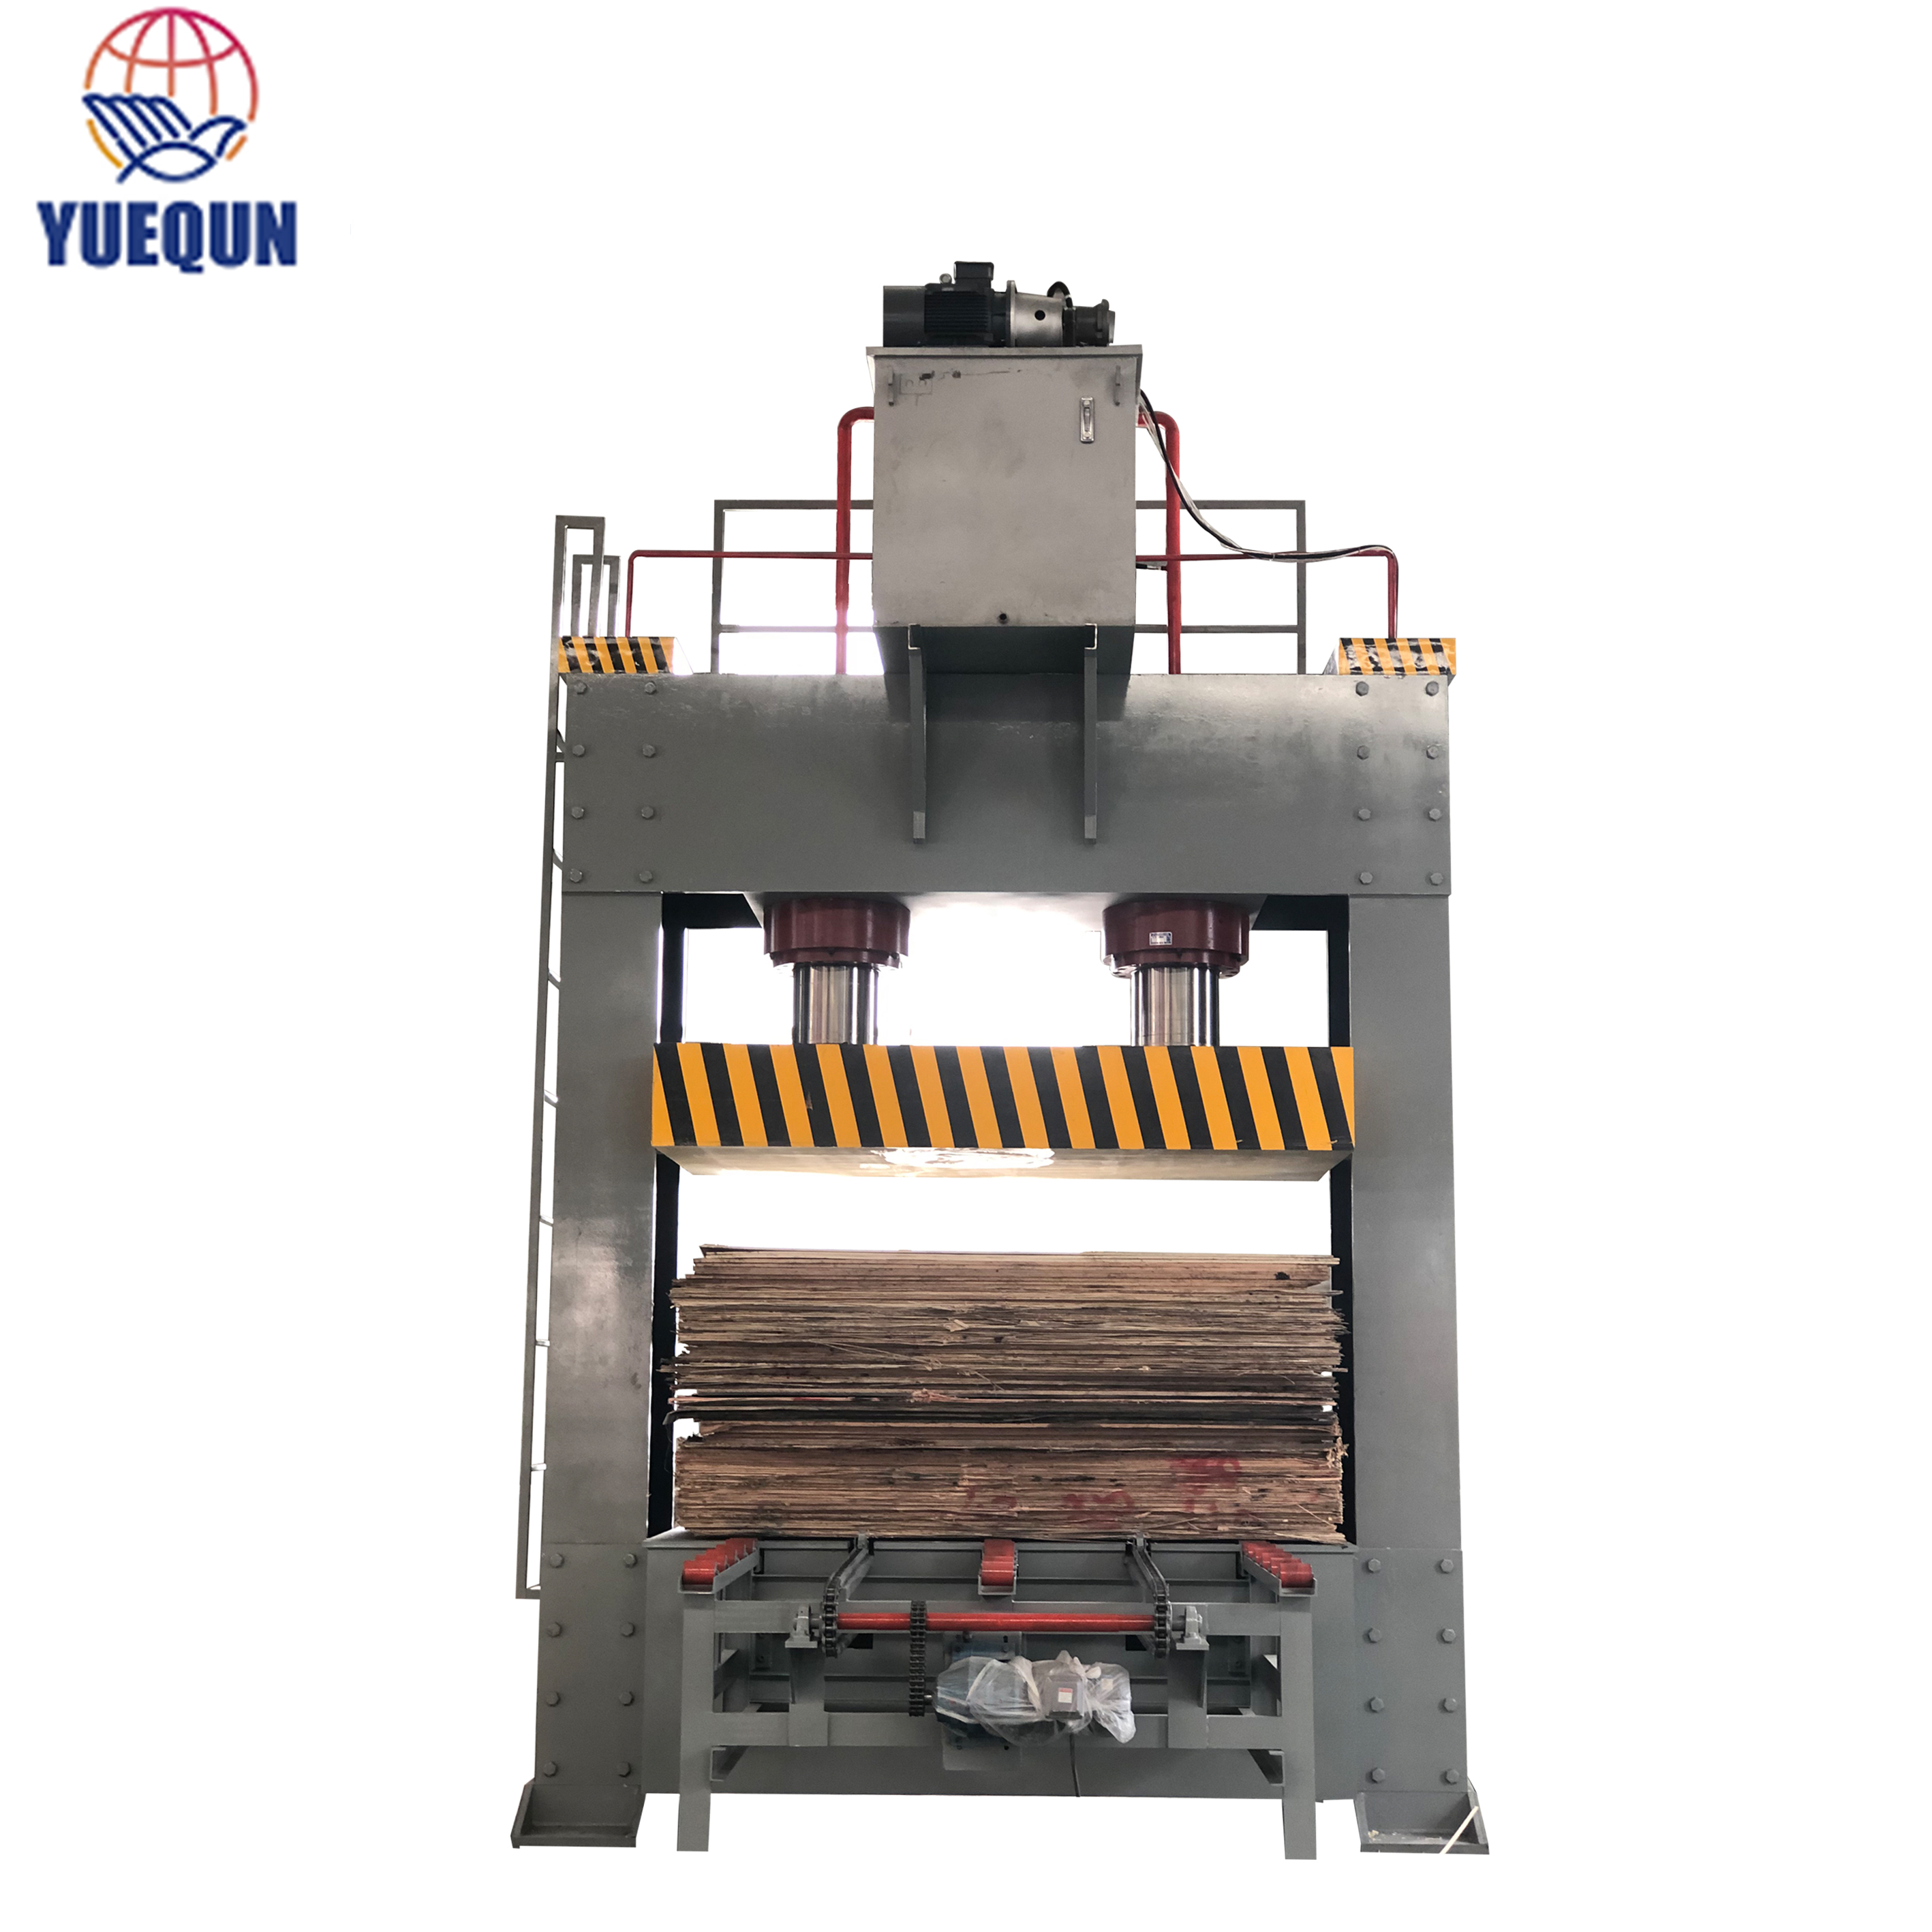 500T wooden door hydraulic cold press machine for plywood